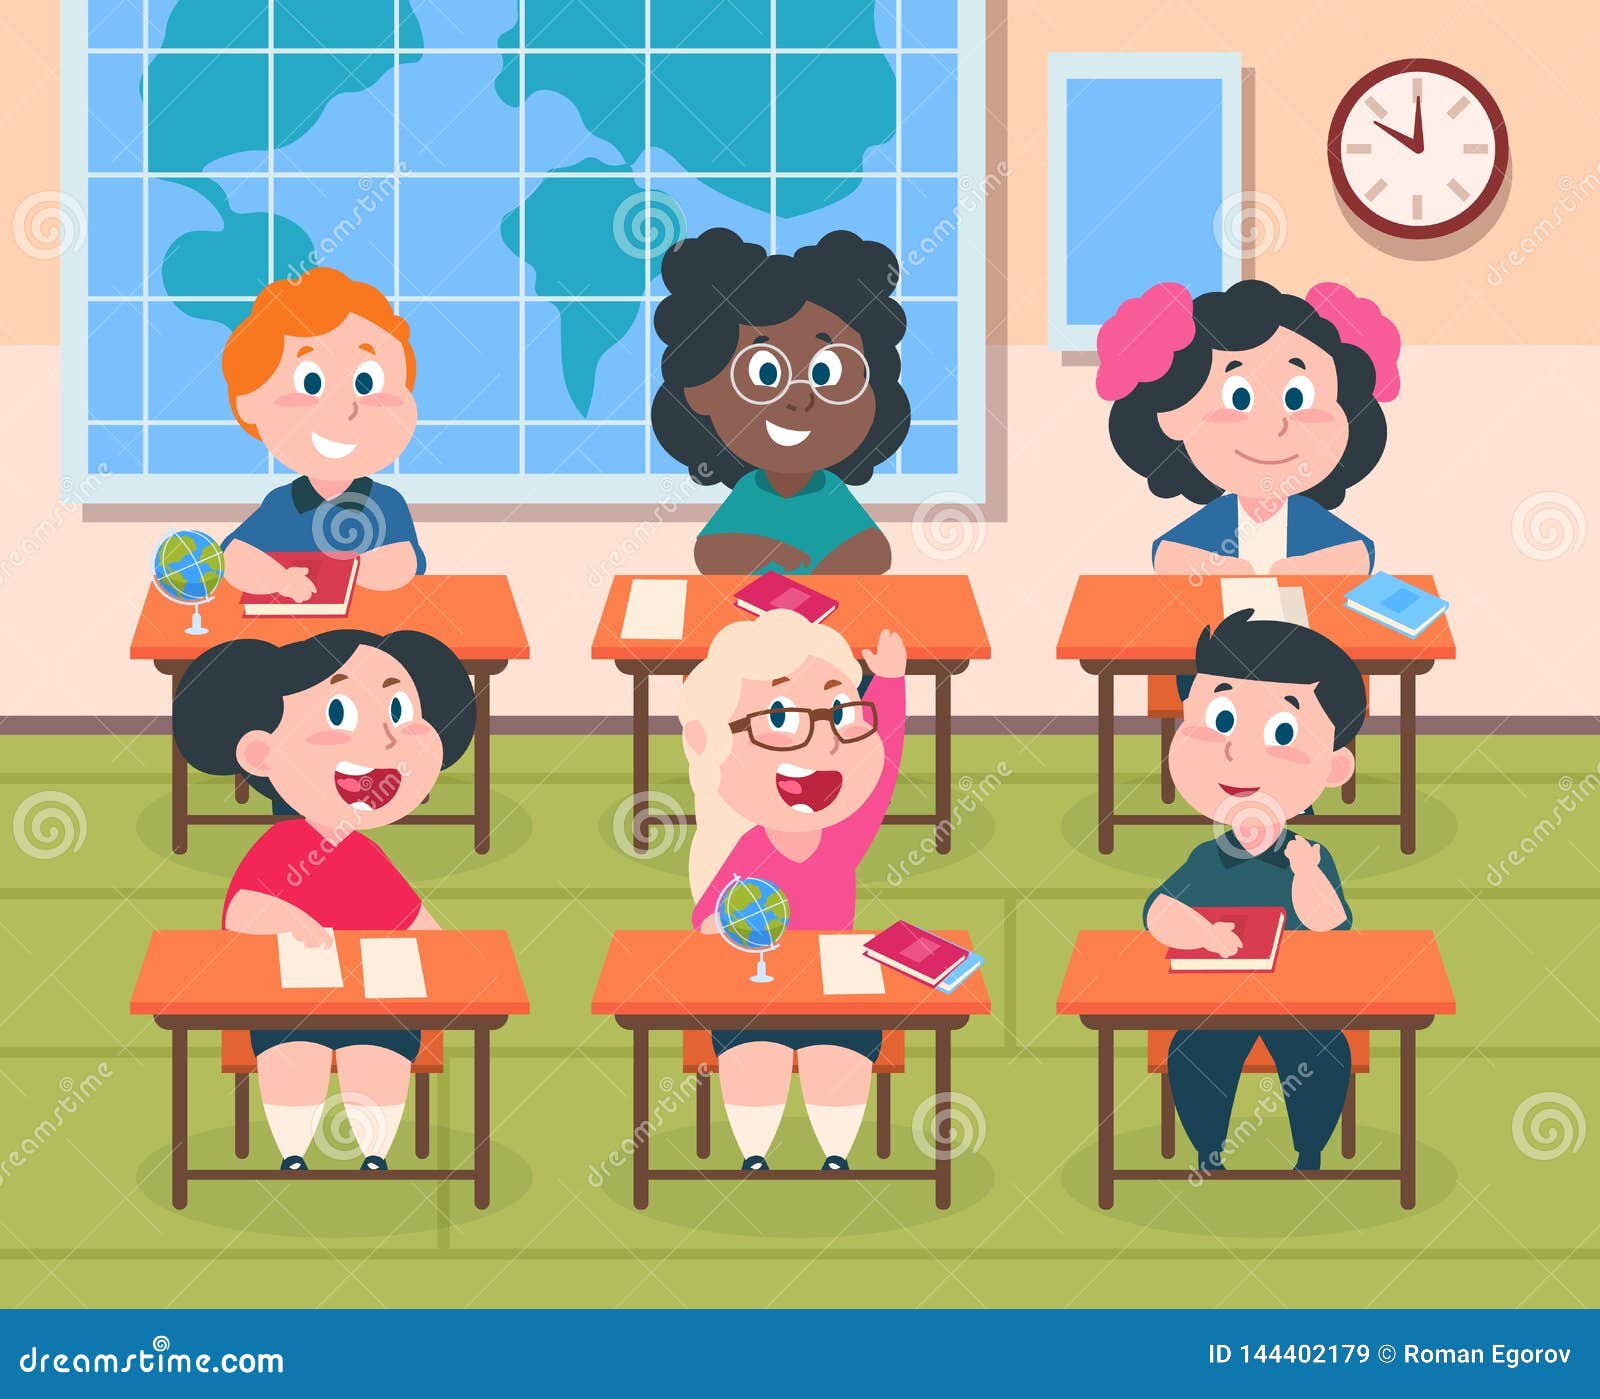 Kids in Classroom. Cartoon Children in School Studying Reading and Writing,  Cute Happy Girls and Boys Stock Vector - Illustration of interior, reading:  144402179